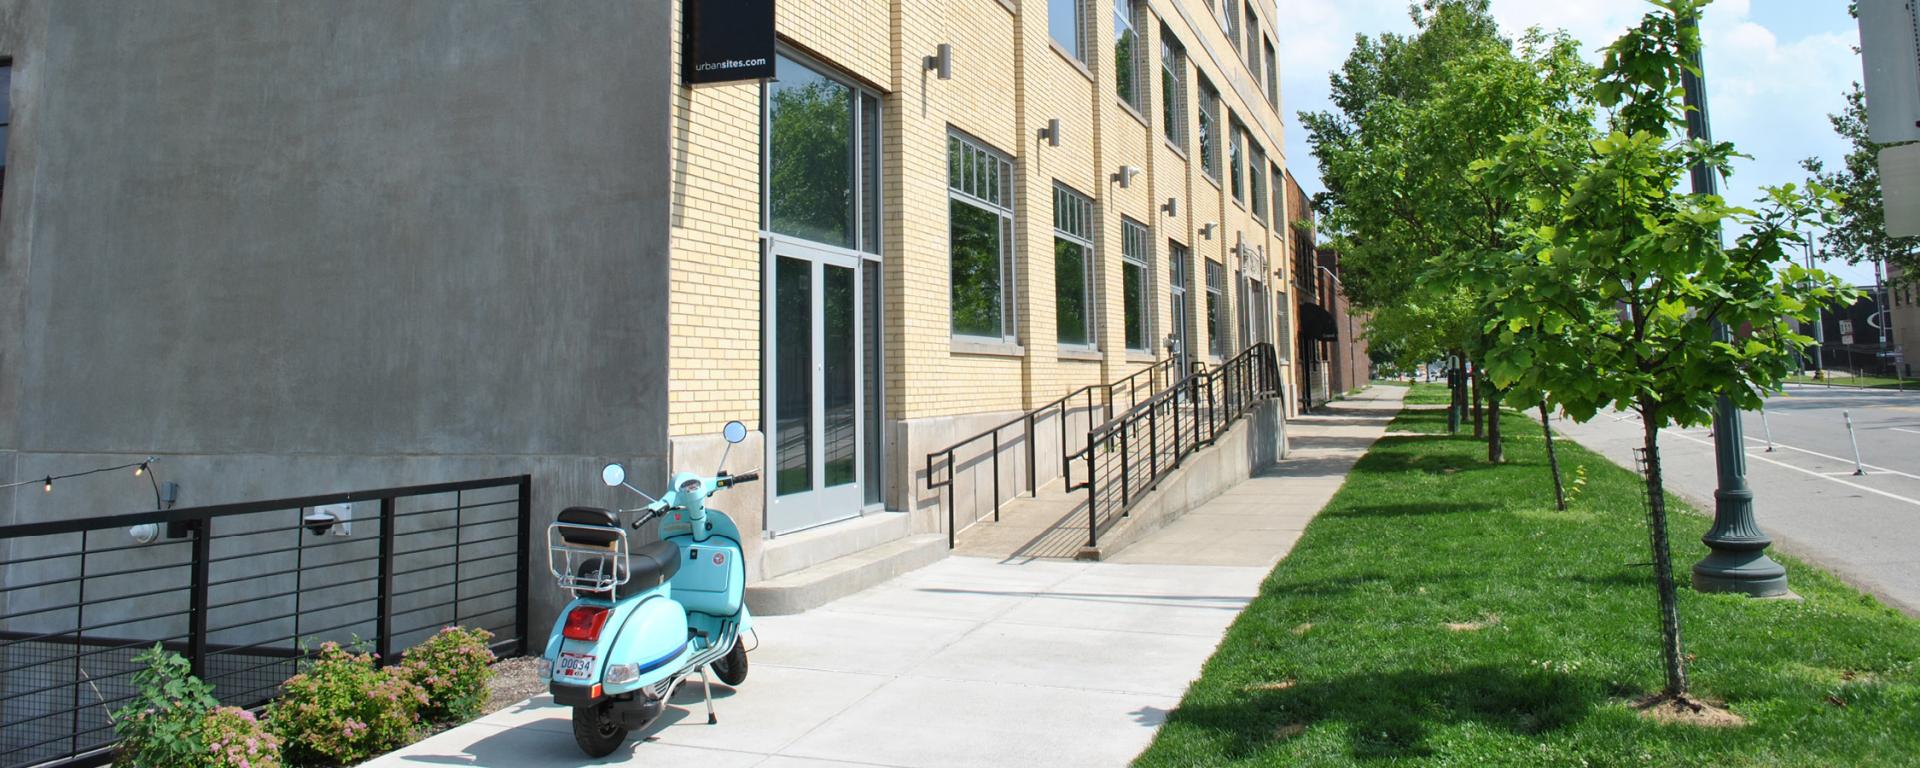 light blue scooter parked next to yellow brick building